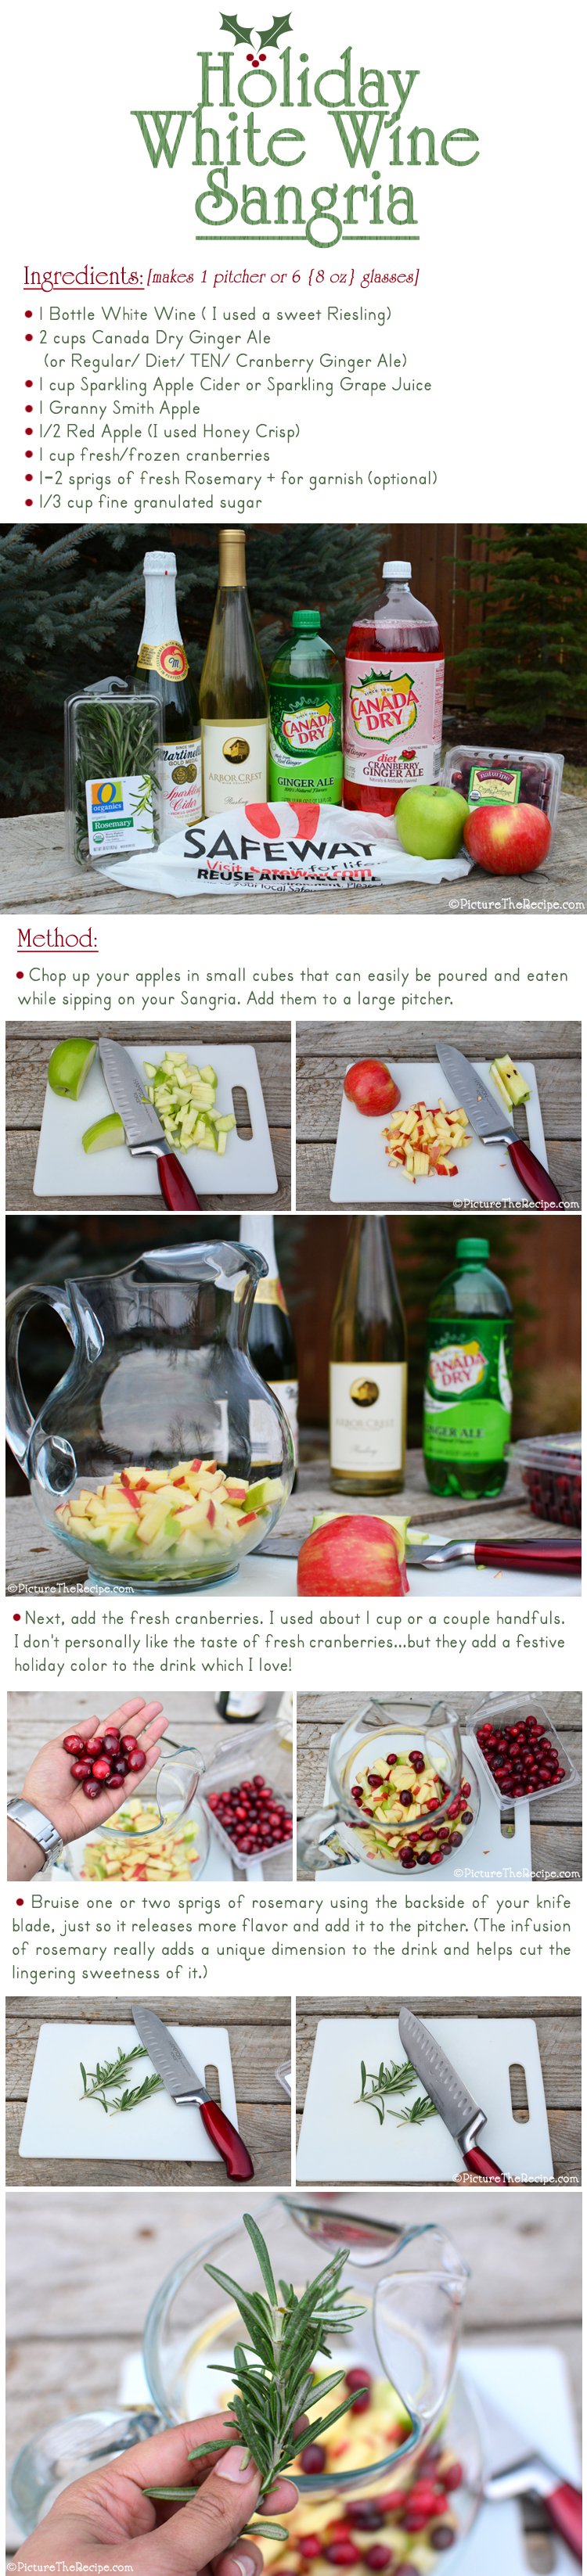 Holiday White Wine Sangria Recipe by PictureTheRecipe- Part 1